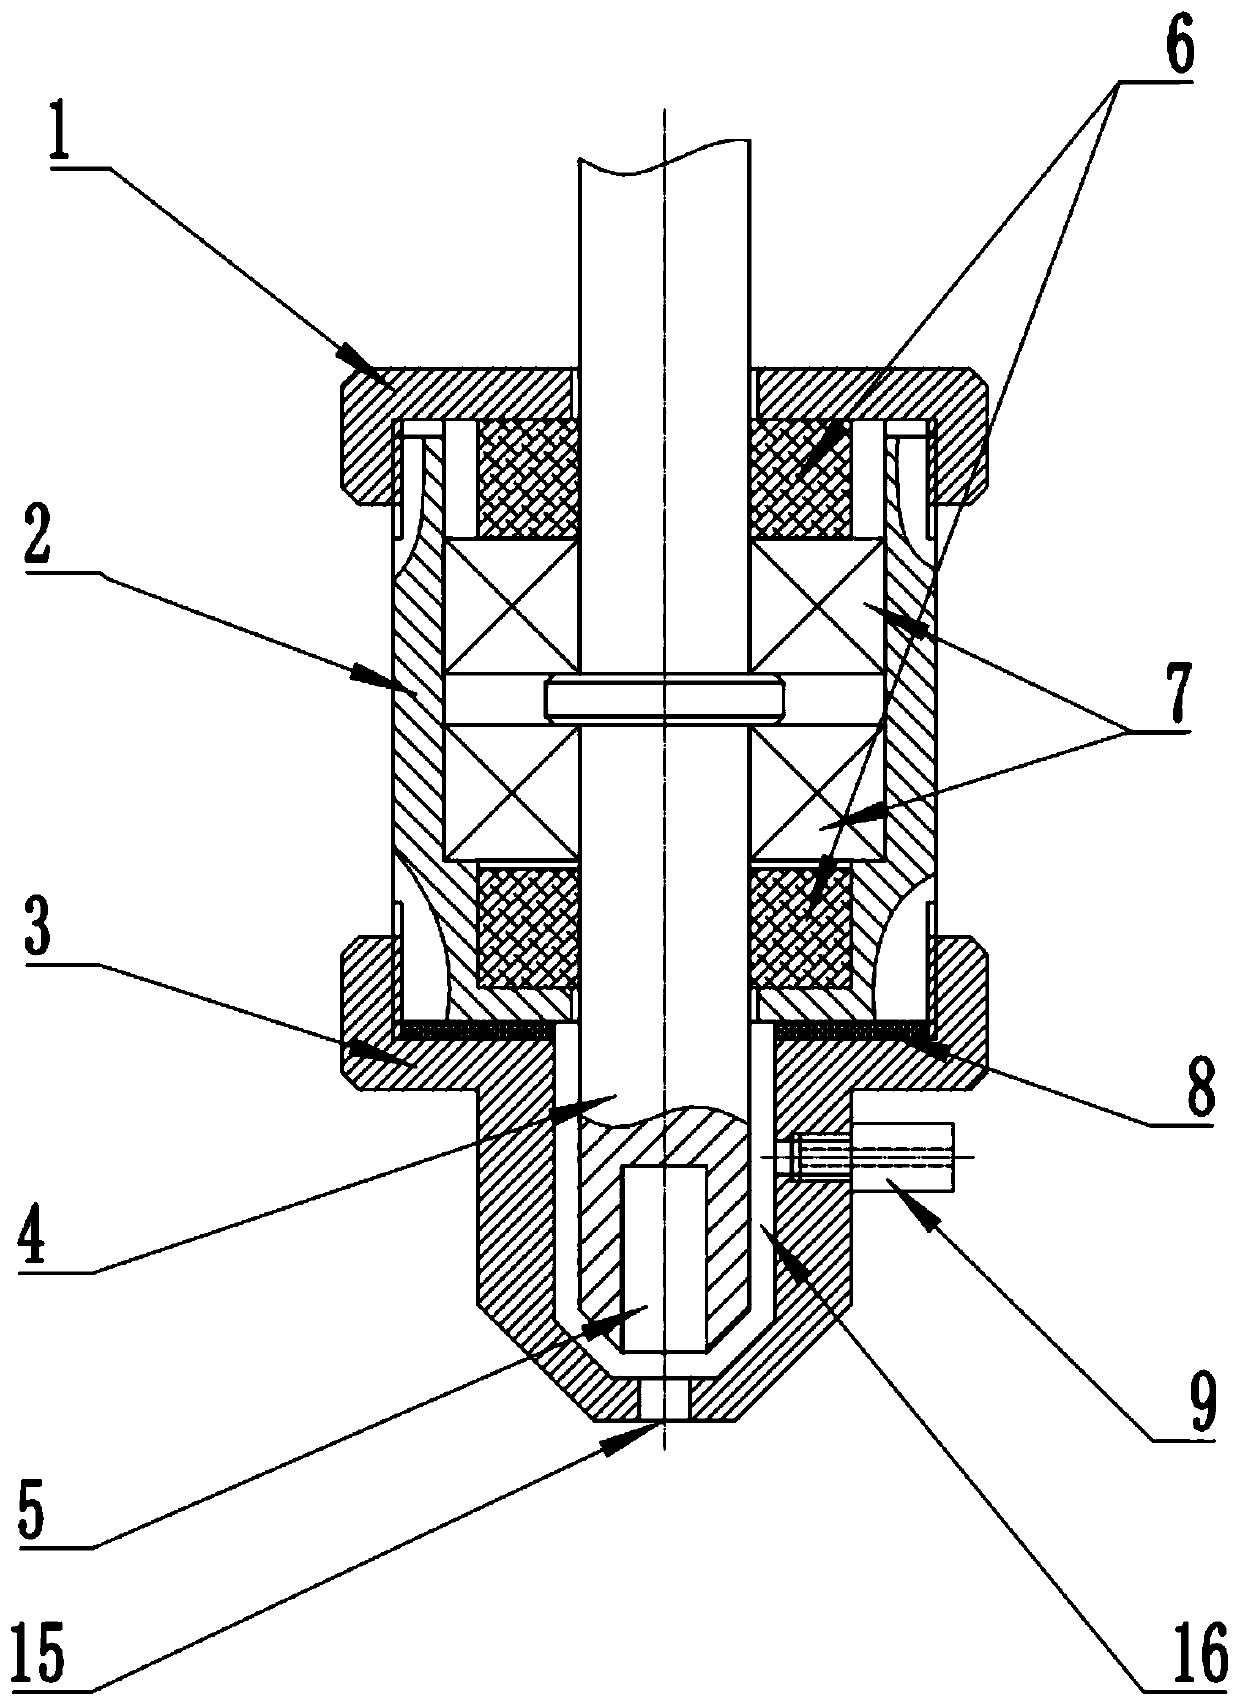 Magneto-rheological polishing device and method based on flow field focusing